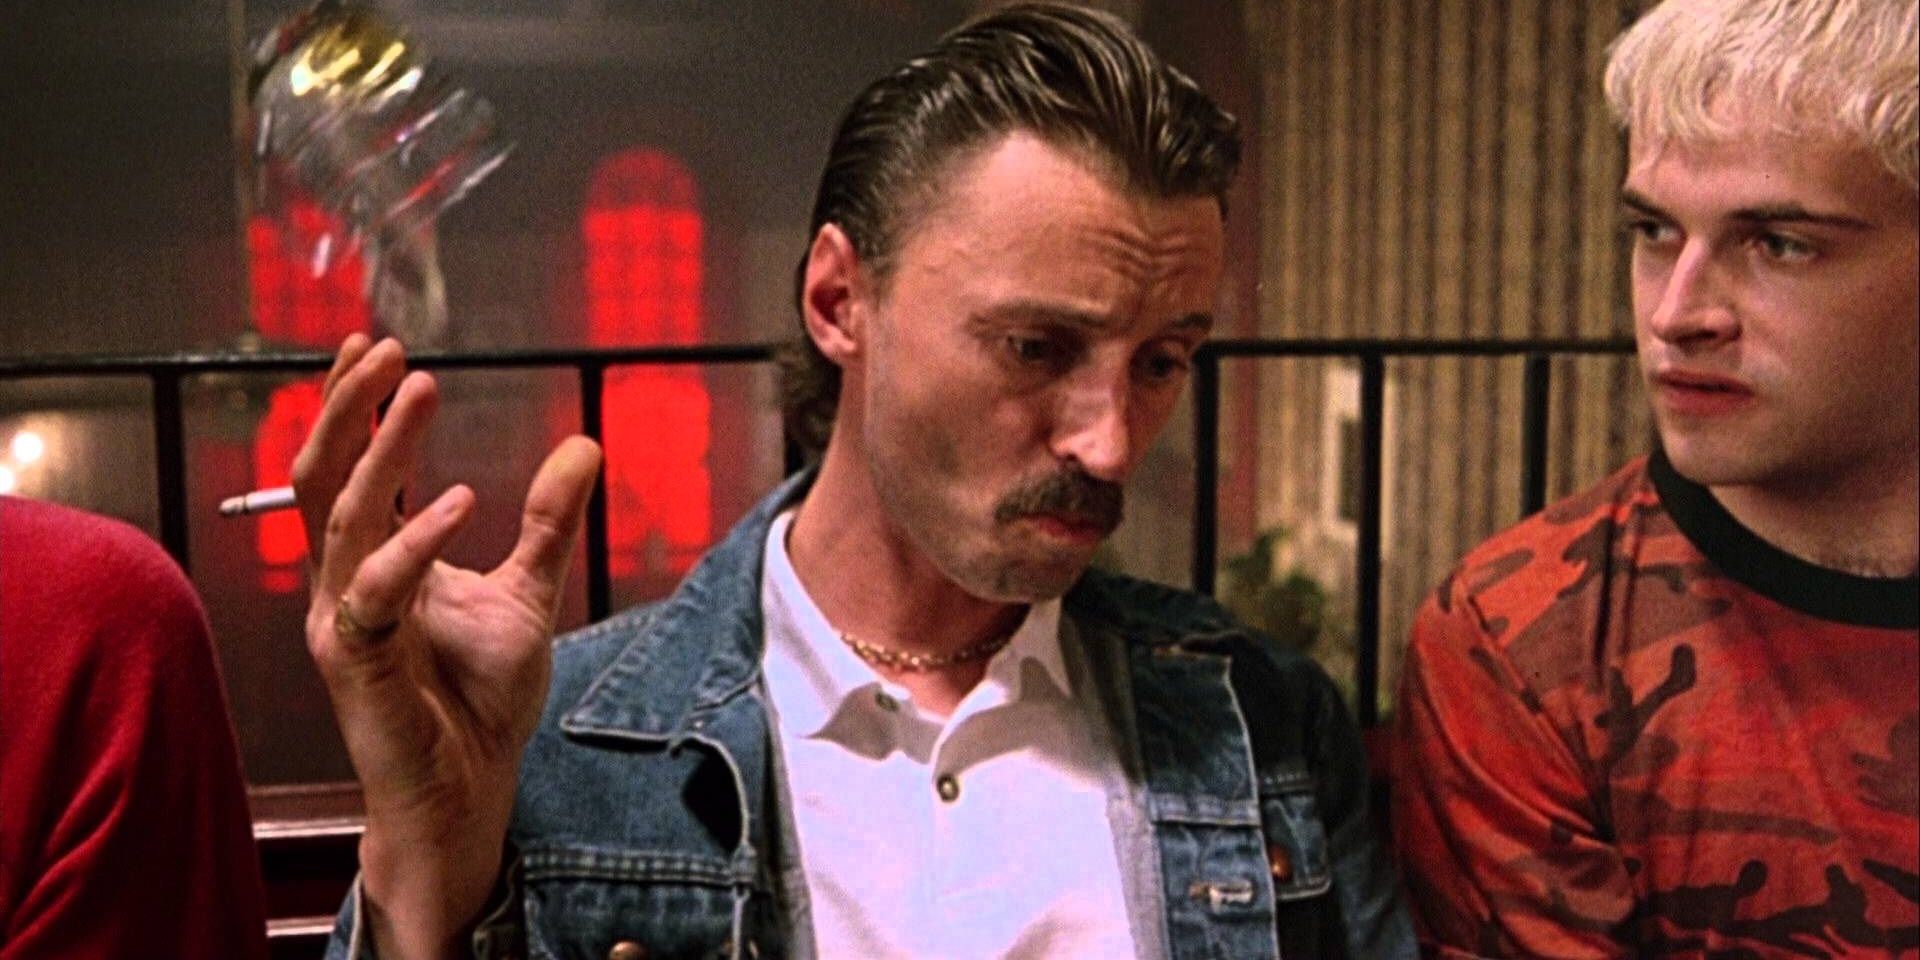 Robert Carlyle as Begbie in Trainspotting tossing a pint glass